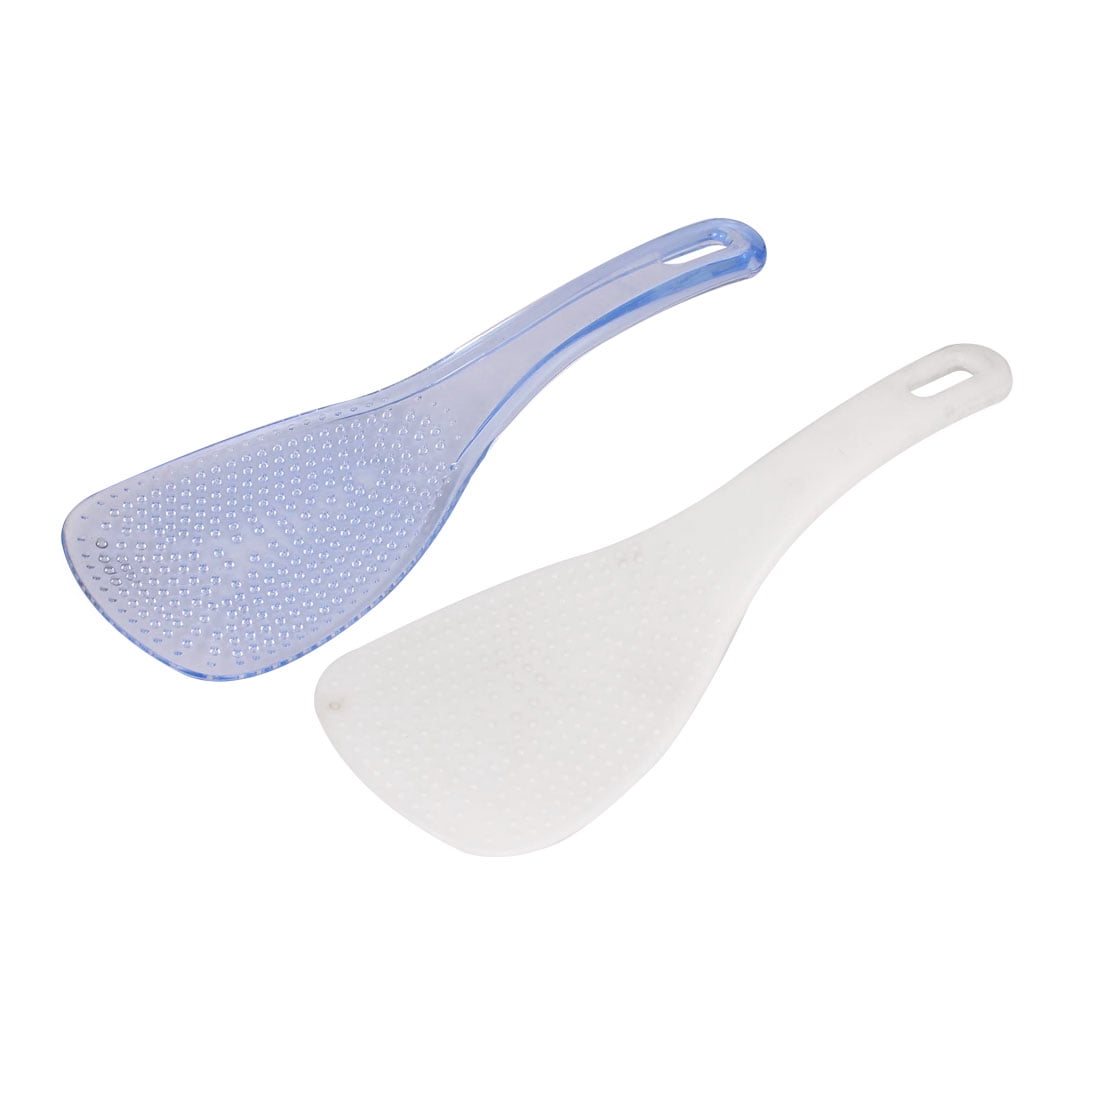 Homyl Heat Resistant Silicone Rice Spoon Paddle Sushi Scoop Non-stick for Kitchen Blue 